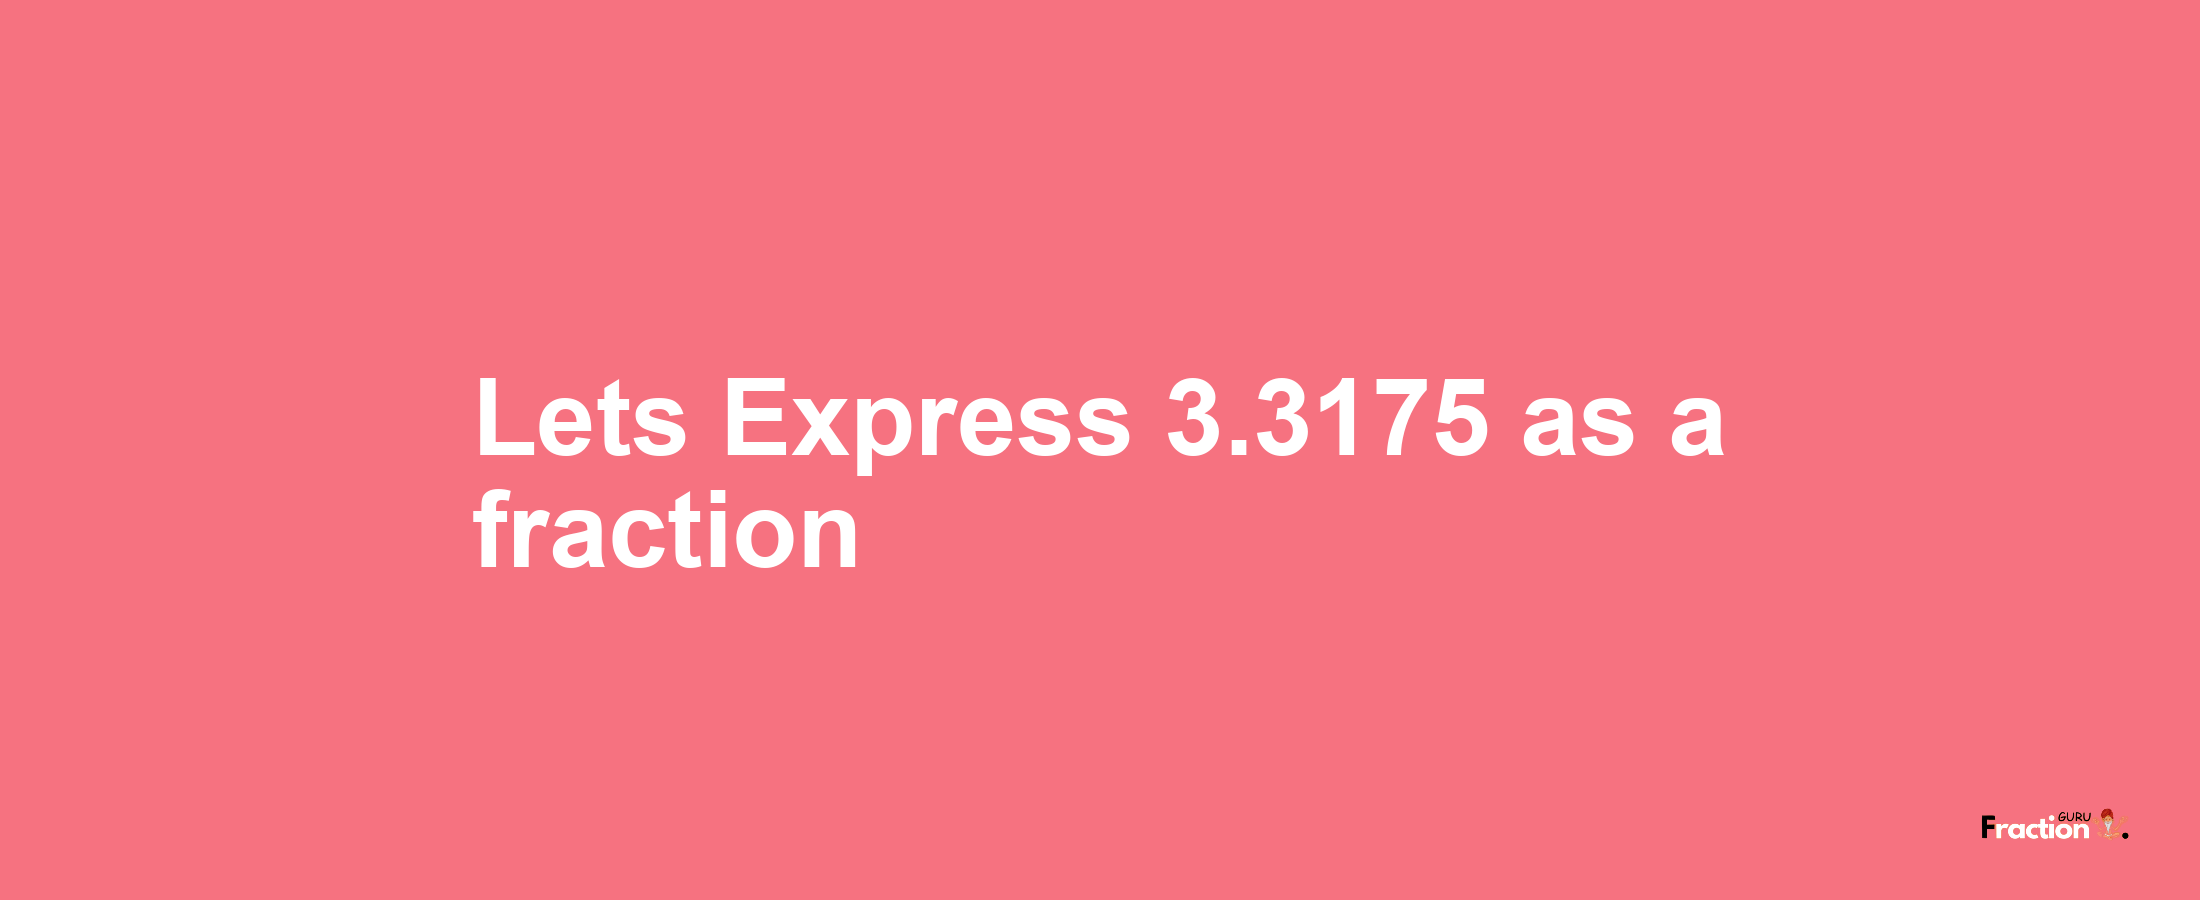 Lets Express 3.3175 as afraction